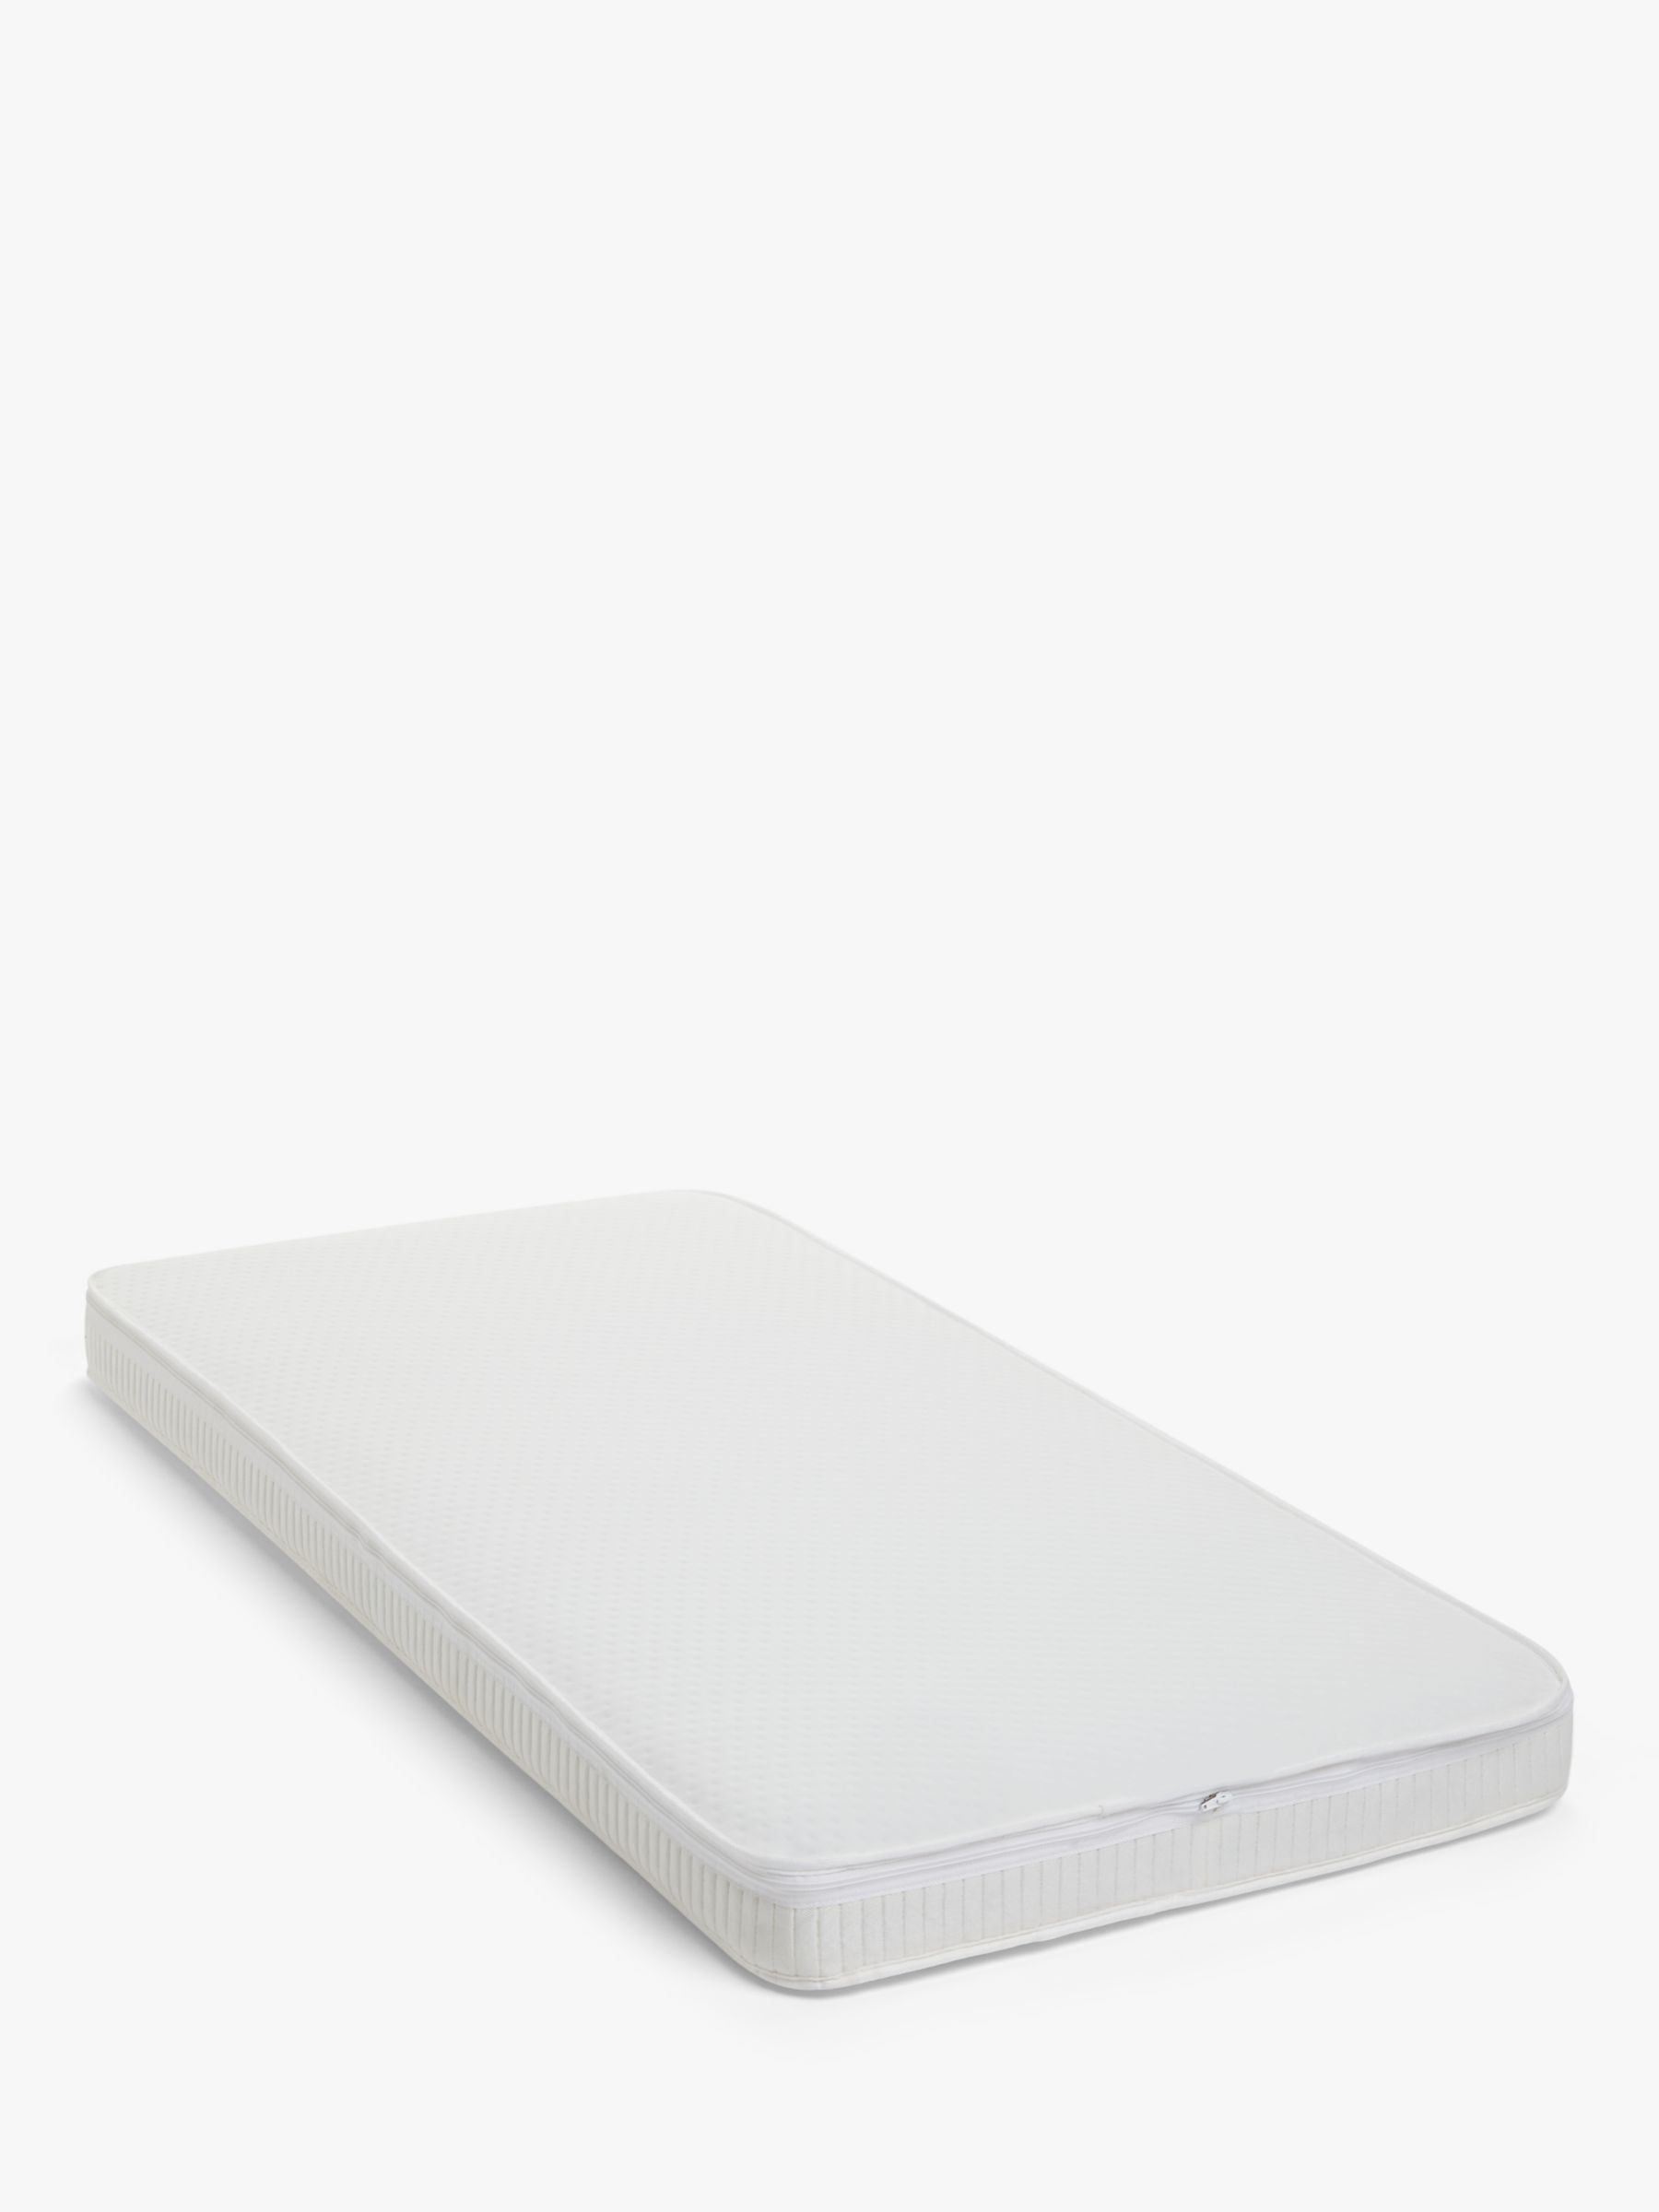 Image of John Lewis and Partners Spring Cotbed Mattress 140 x 70cm